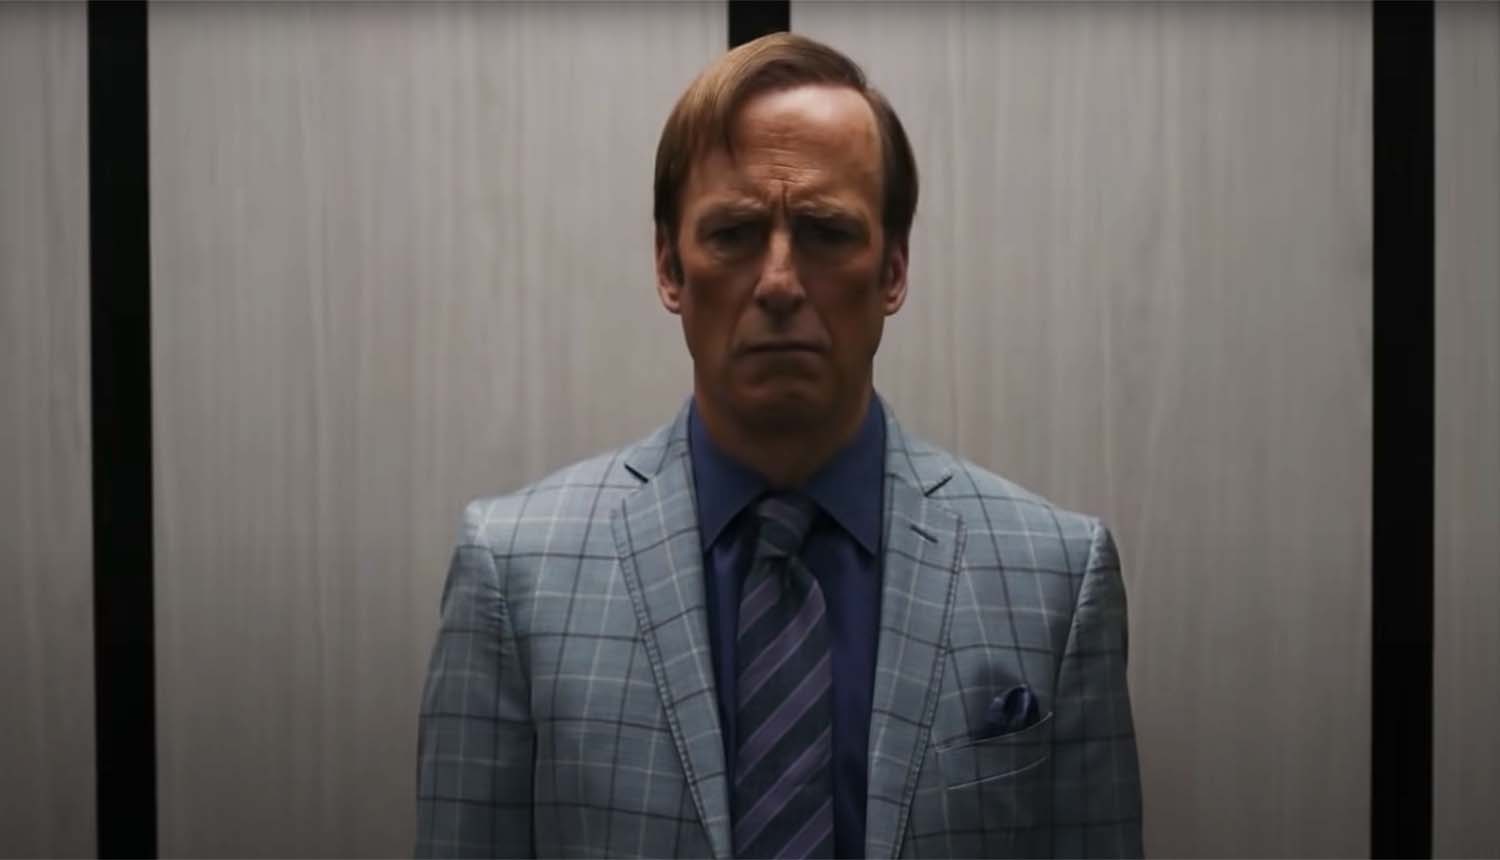 How Long Can A Spinoff Like 'Better Call Saul' Last?